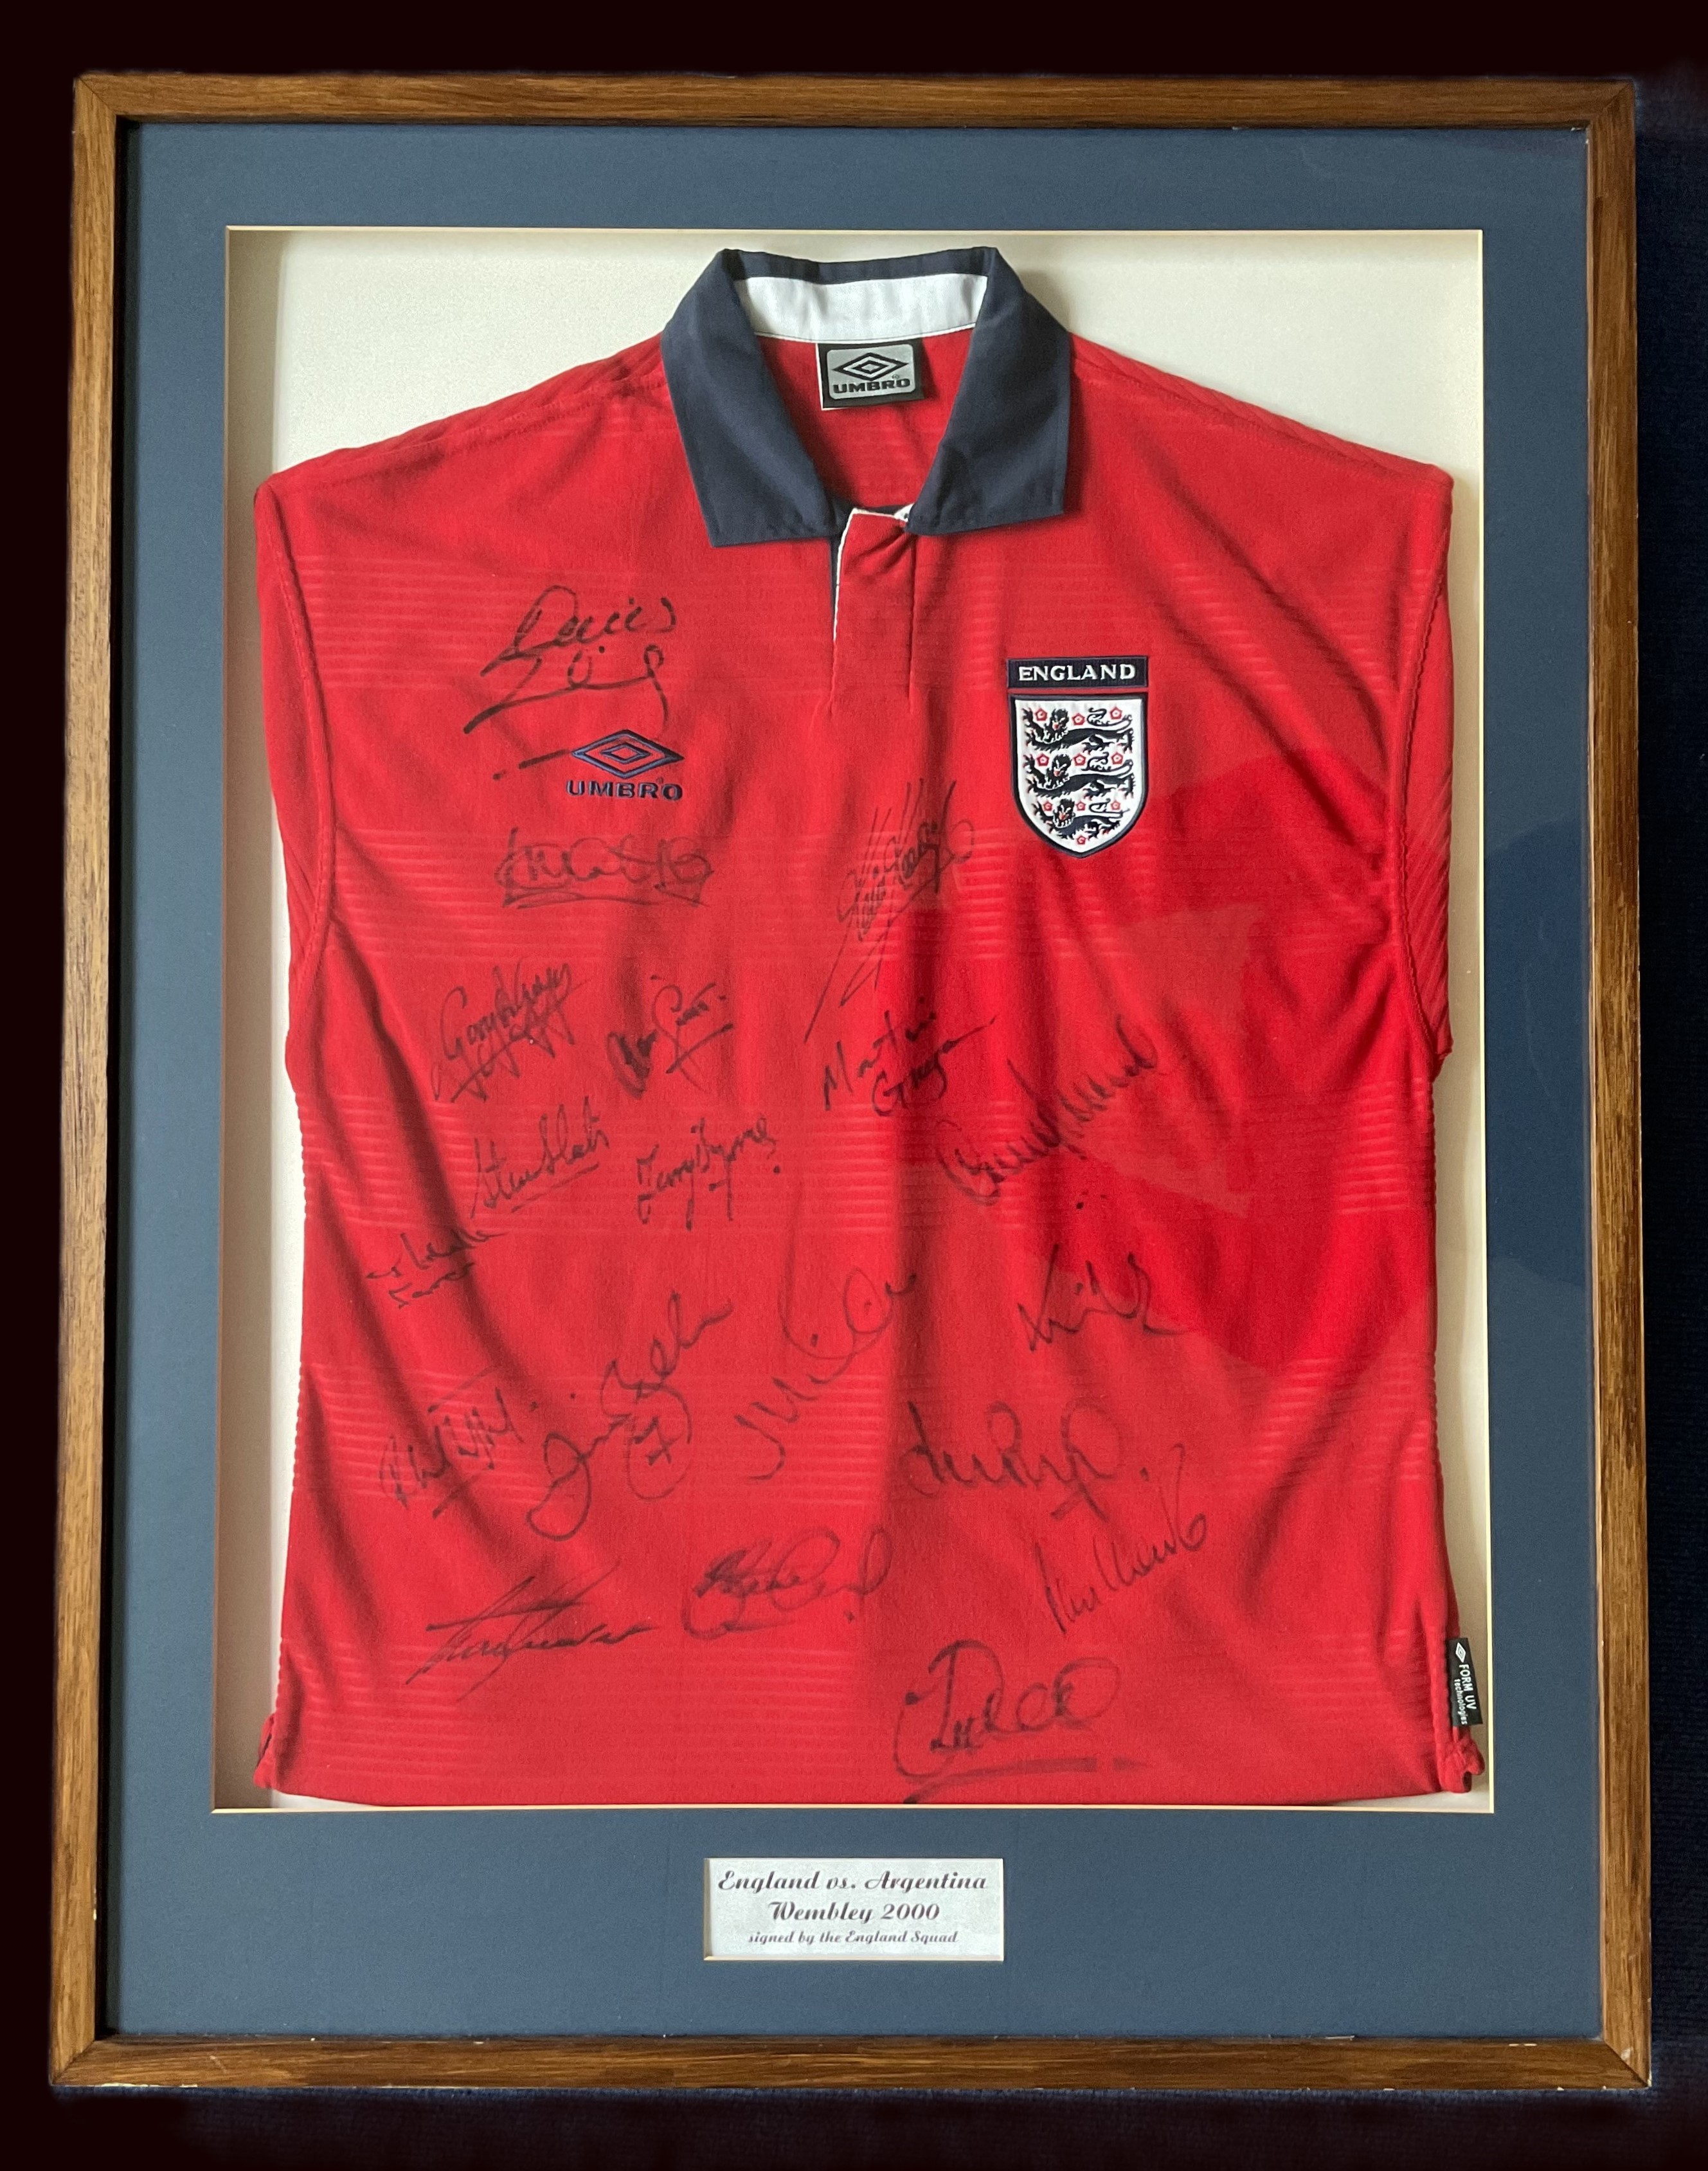 Football England v Argentina 2000 squad multi signed replica shirt 38x30 inch framed and mounted